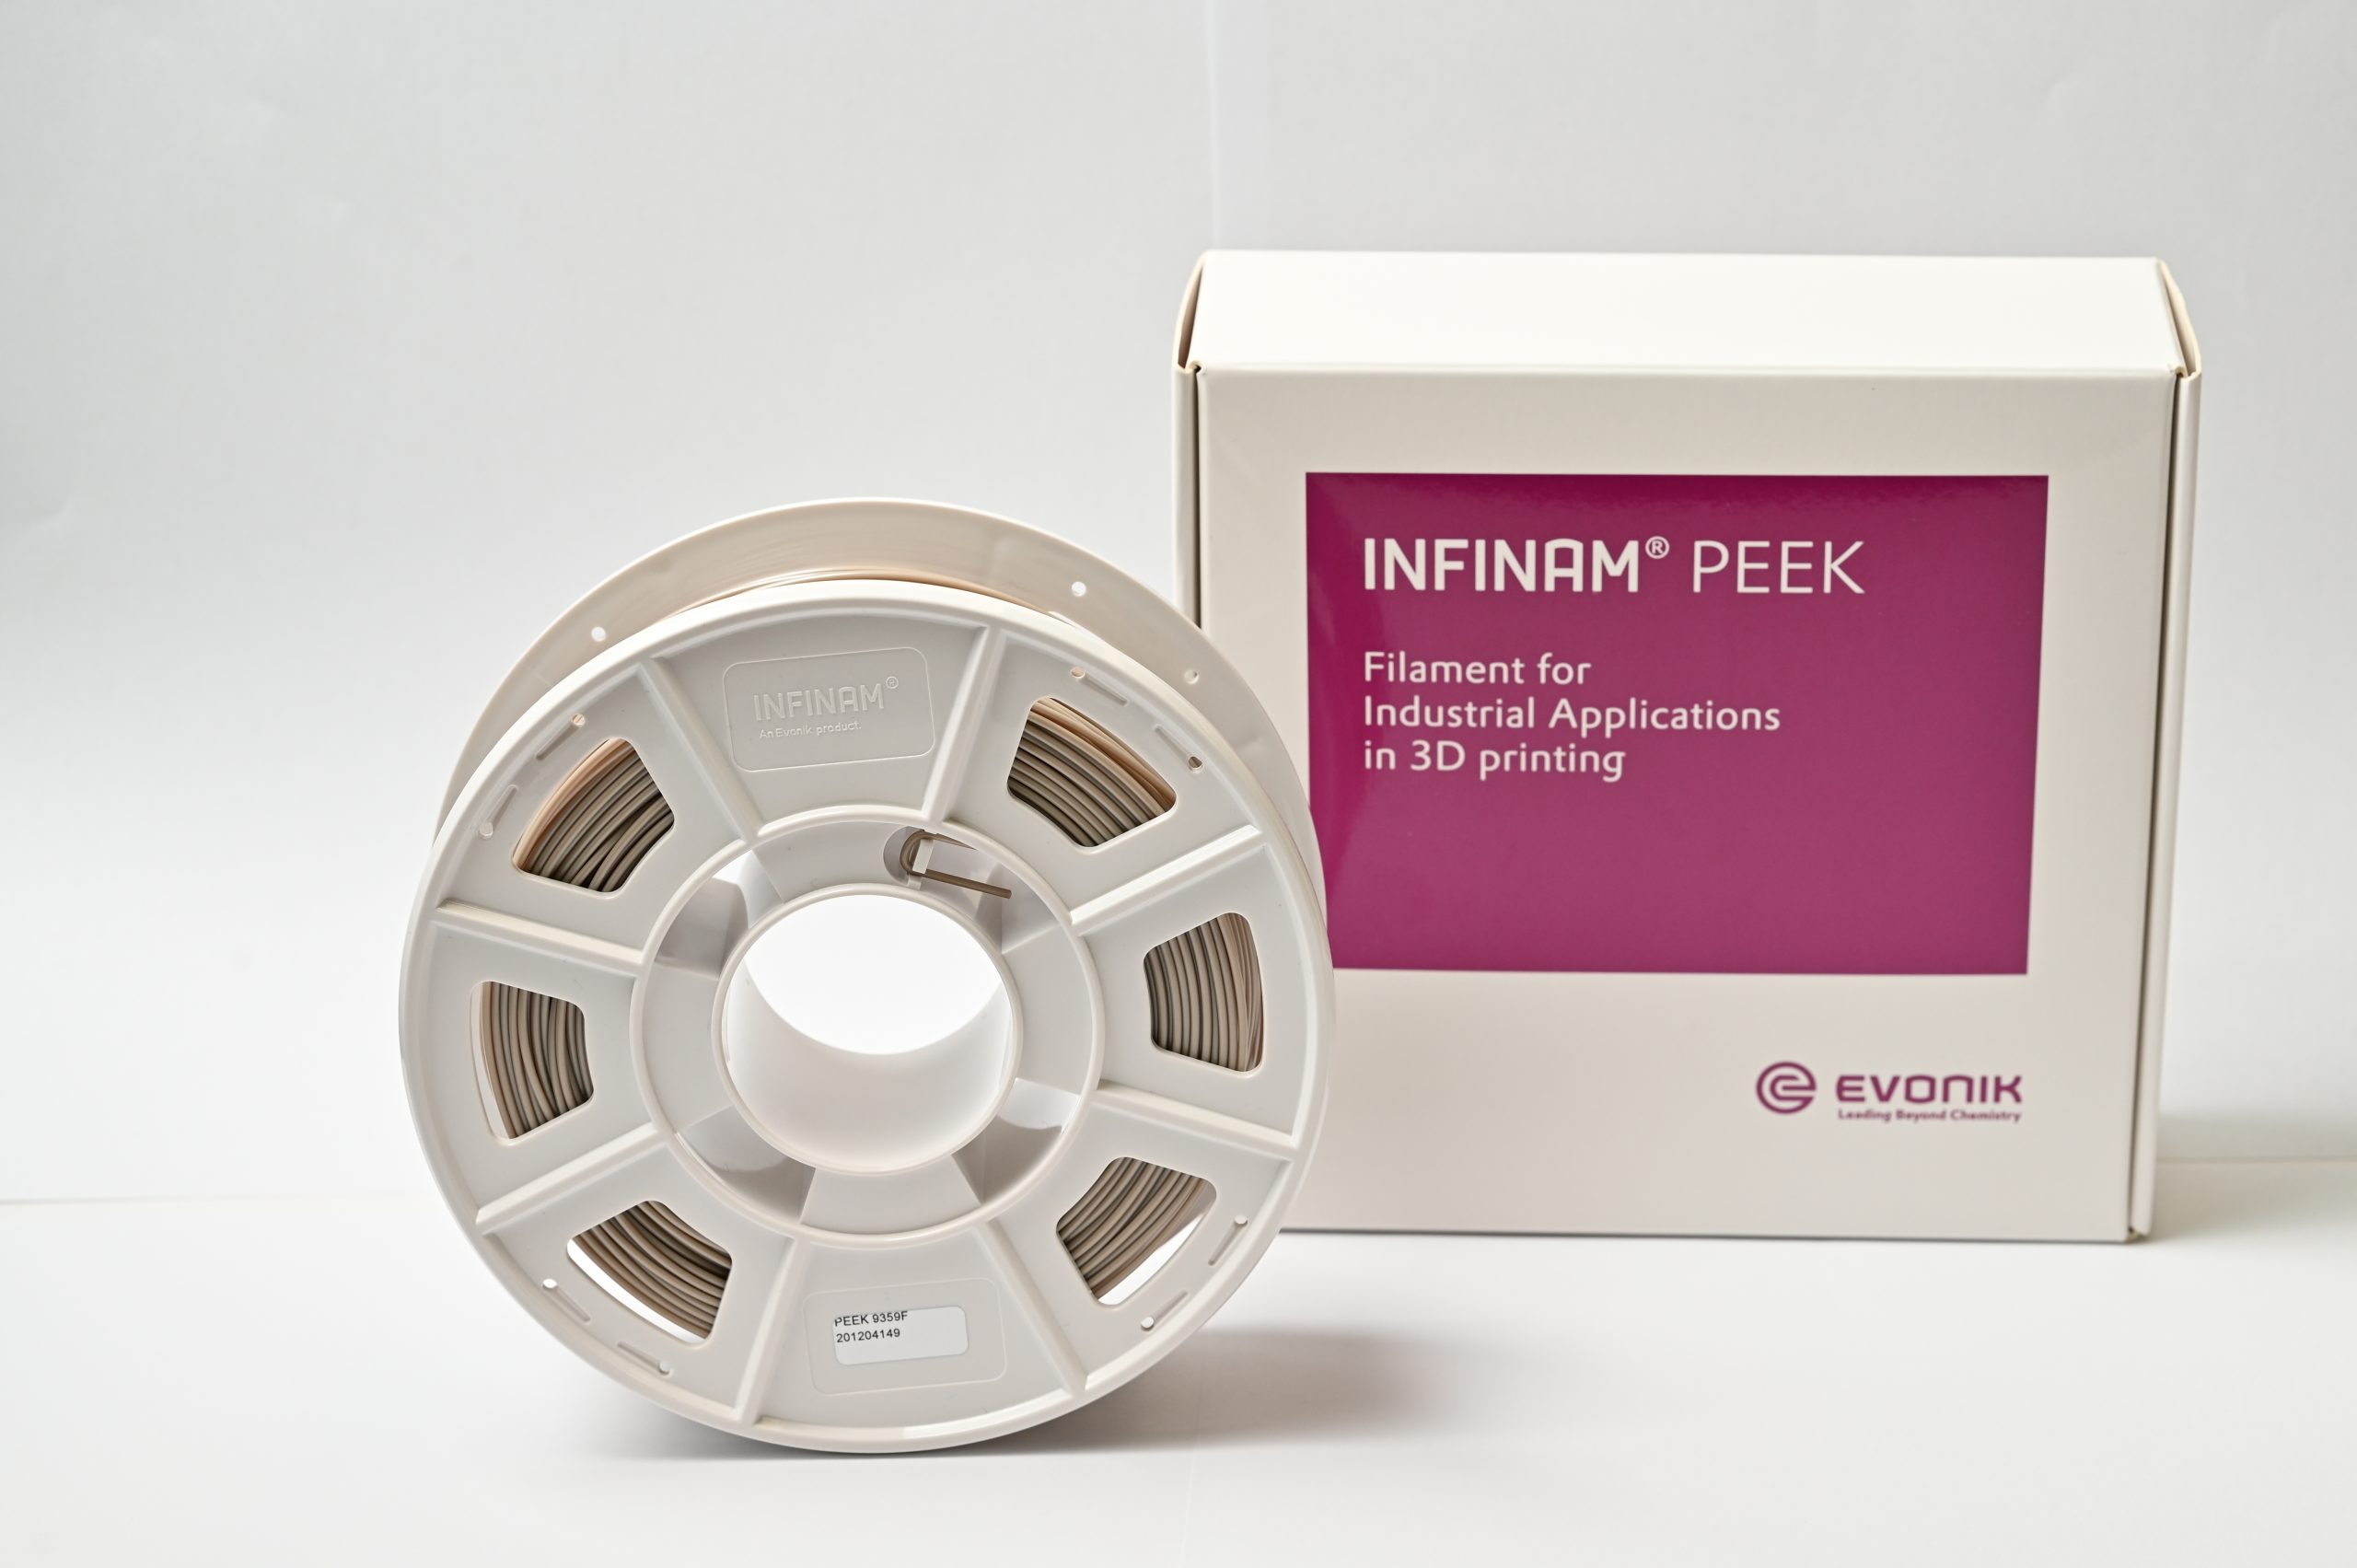 INFINAM PEEK 9359 F high perfomance polymer as a metal replacement for additive manufacturing of demanding industrial plastic parts. Photo via Evonik.